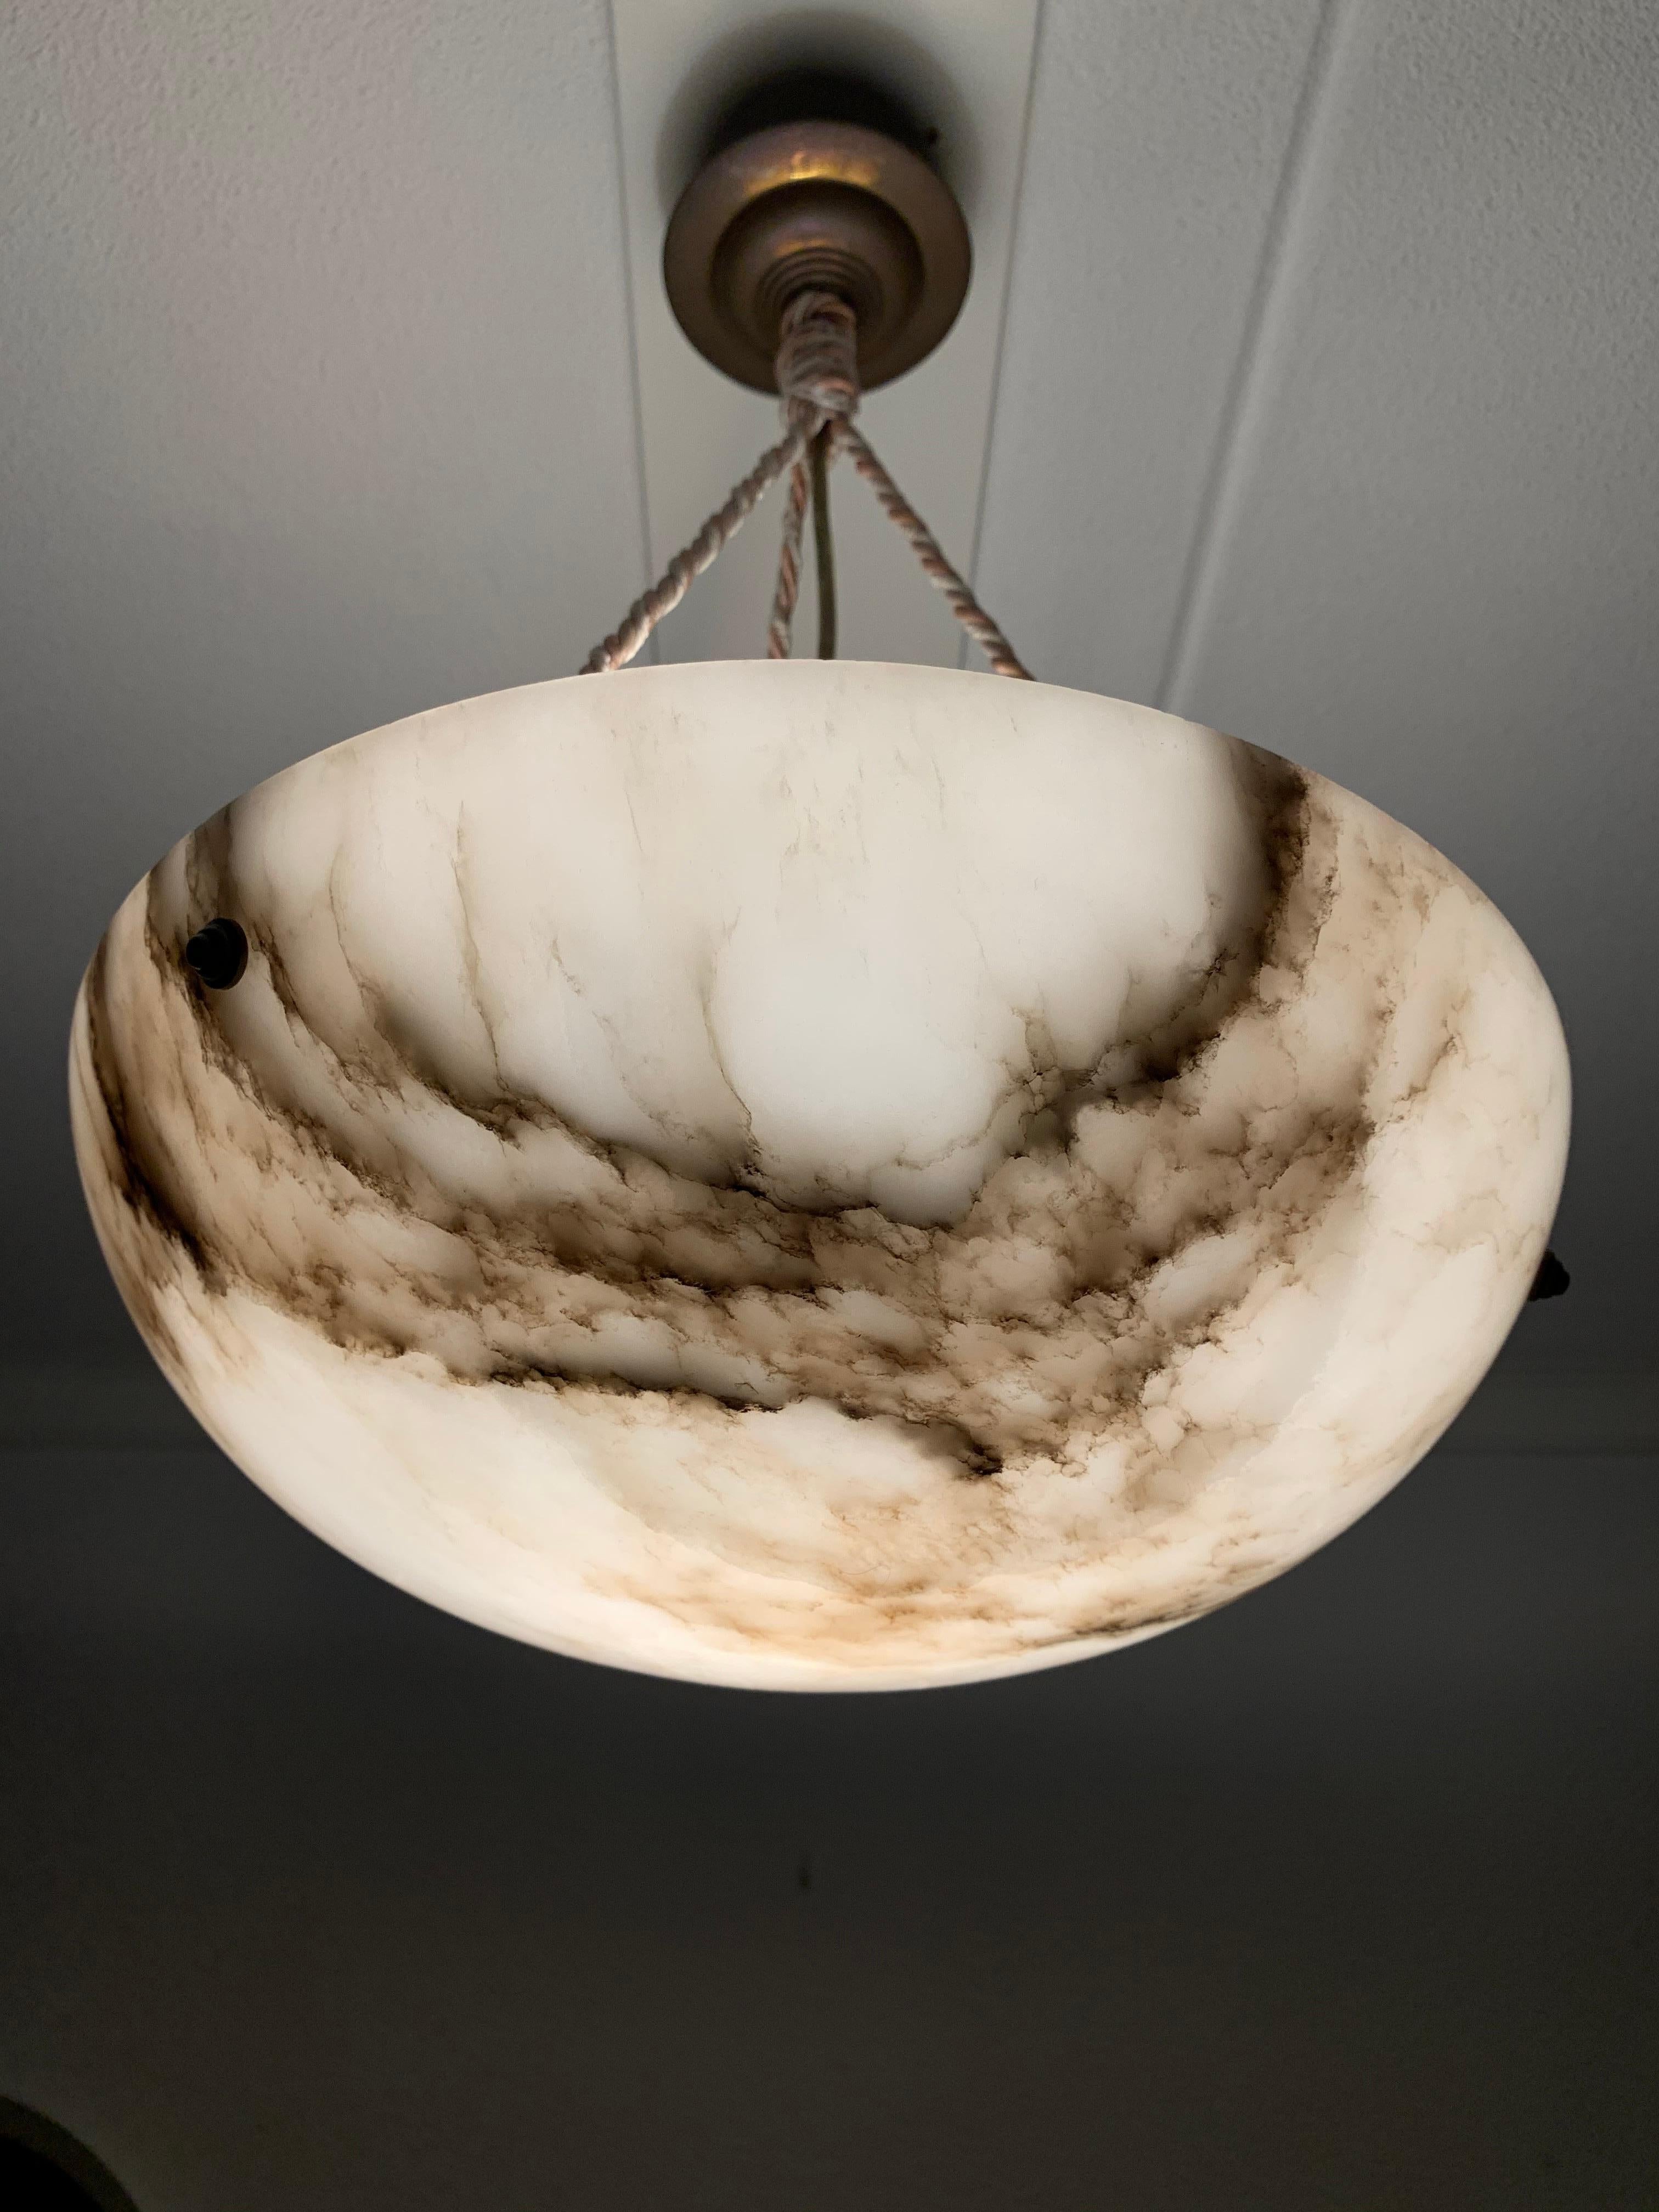 Marvelous antique light fixture for an entry hall, bedroom or any other small room.

But also provides enough light for a large room.
With early 20th century light fixtures being one of our specialties, we always love finding timeless pendants and